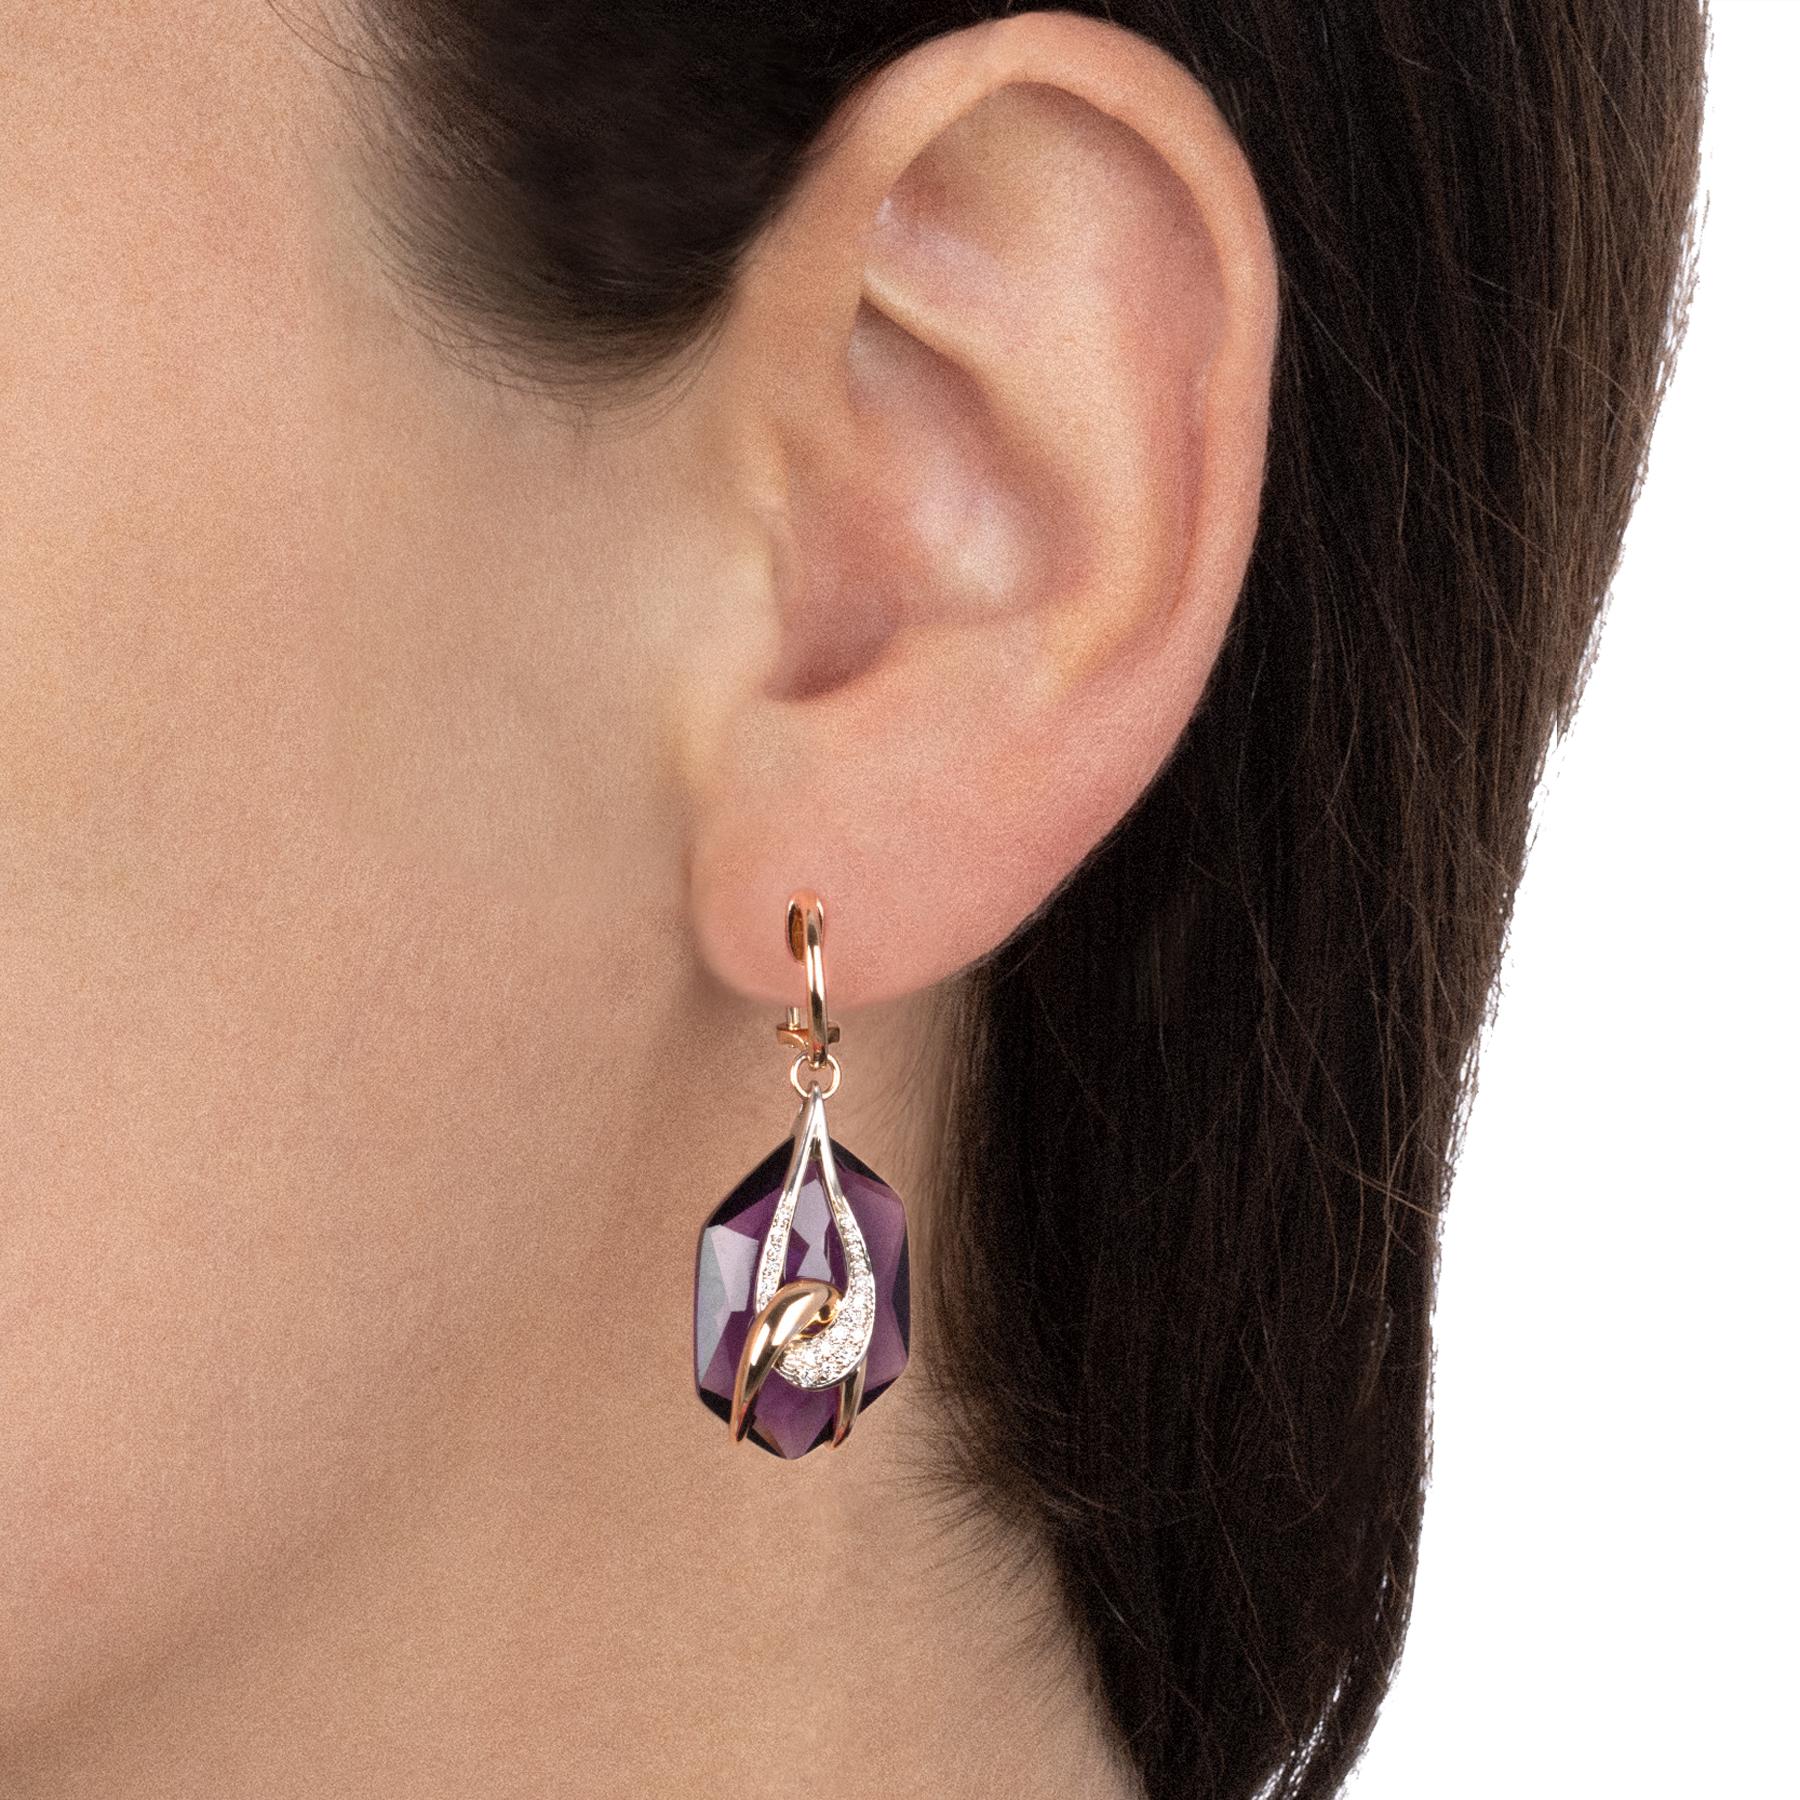 The original and captivating design of these dangle earrings won’t certainly go unnoticed. The evocative charm of the central amethyst blends with the innovative design of the intertwined decoration in white and rose gold. The warm tone of the rose